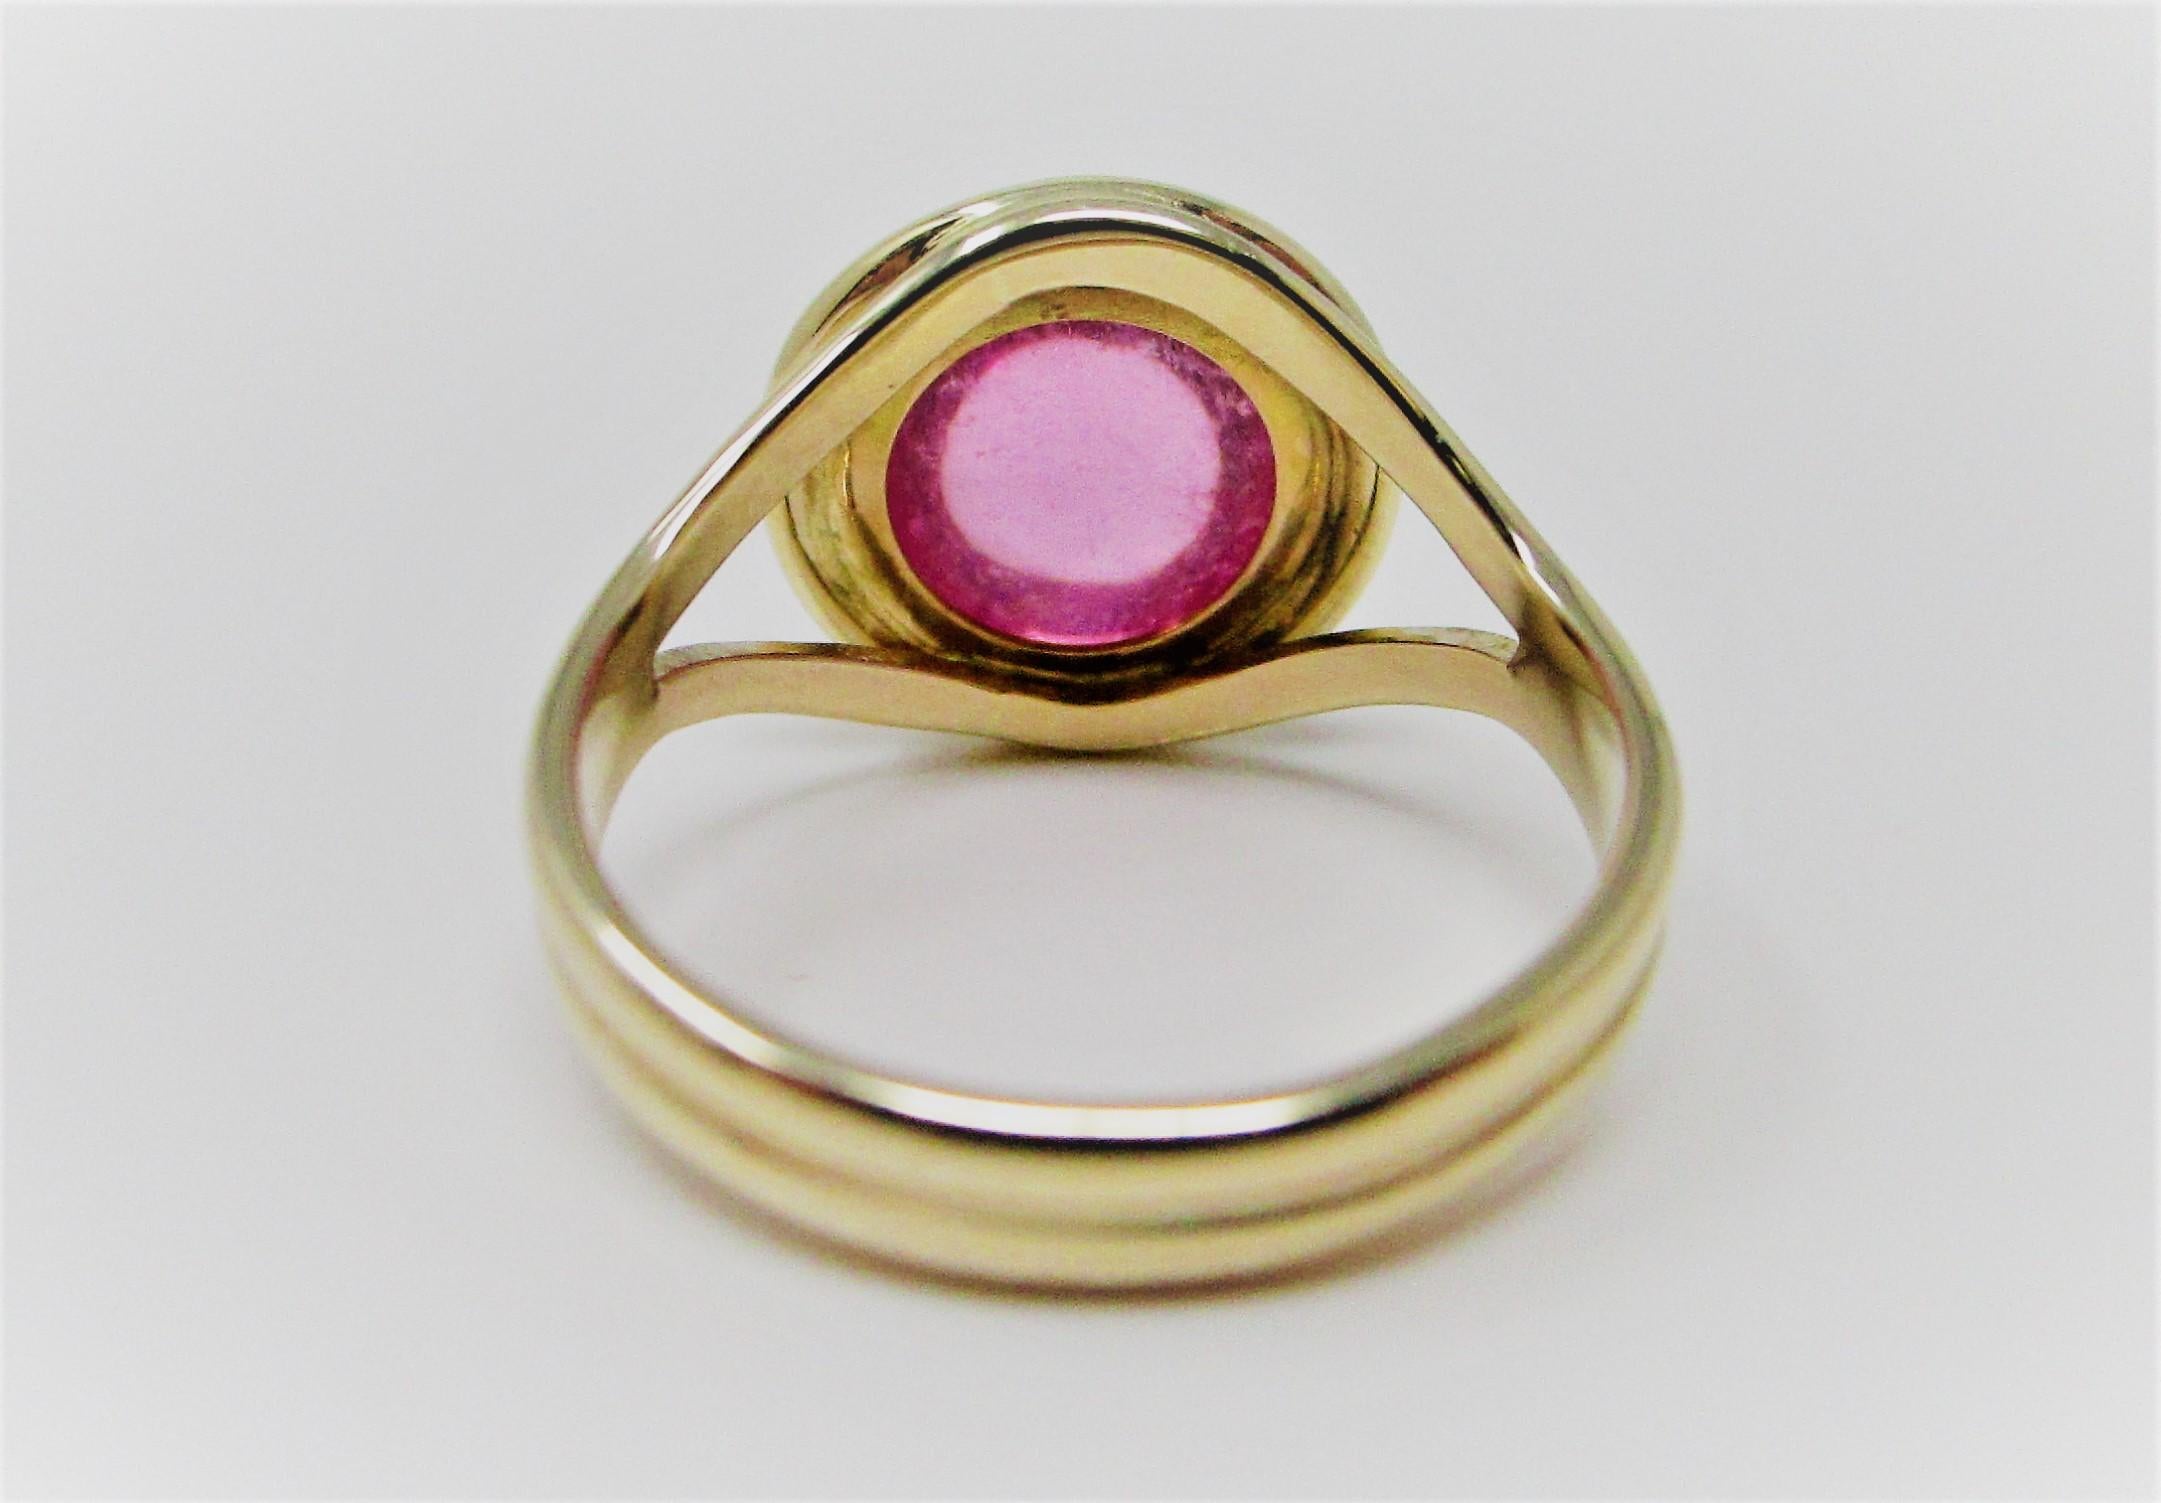 Bezel set cabochon pink tourmaline ring in 14 karat yellow gold.  This is a great modern piece with a designer look!  Size 7.